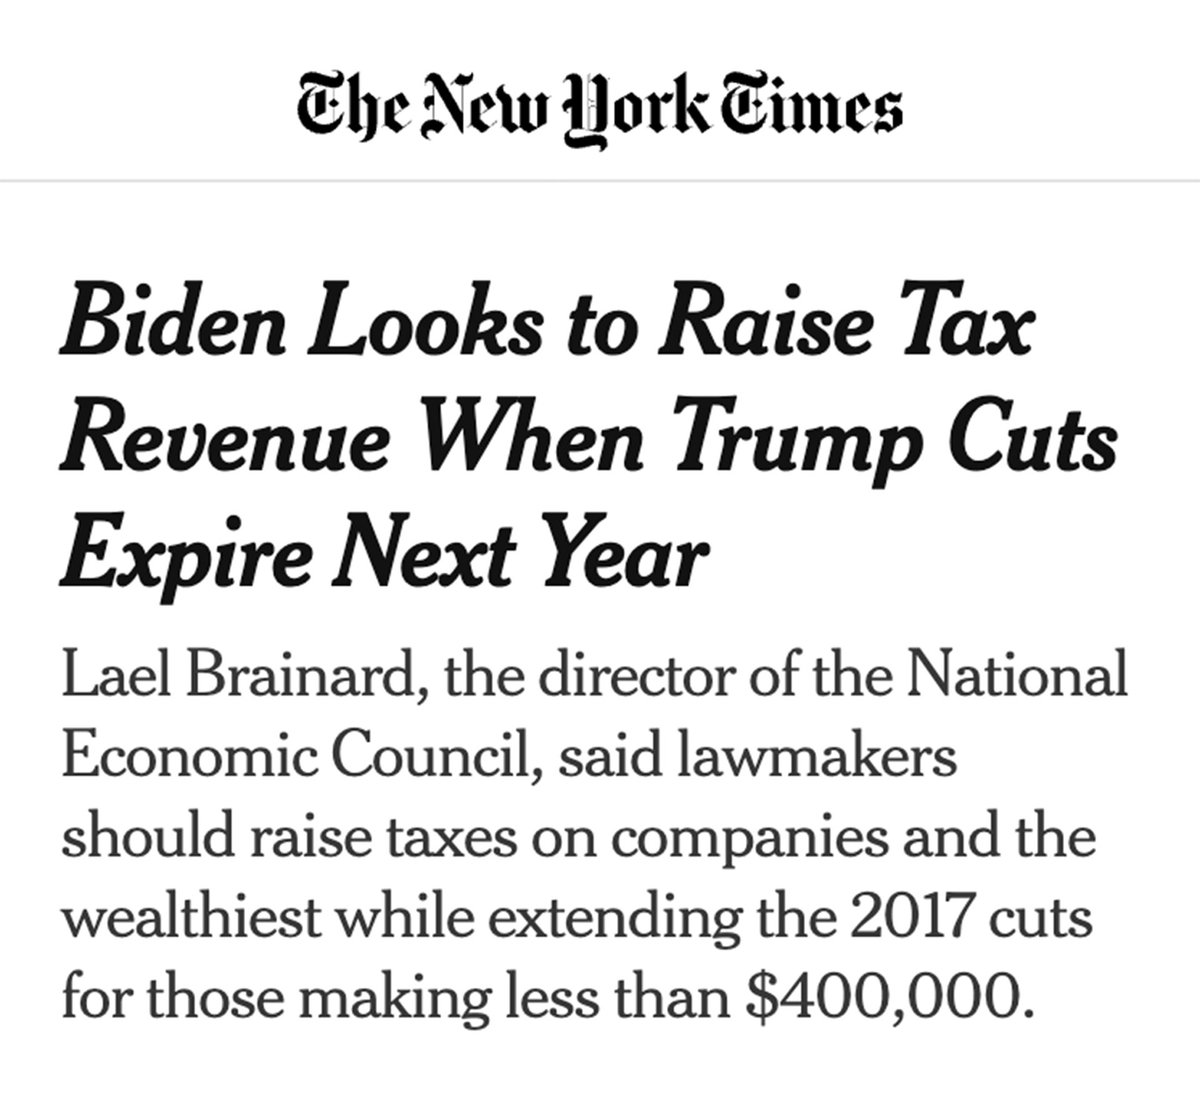 “As the president has said, tax cuts for the wealthy will stay expired on his watch.” @POTUS is right. We don't need more tax breaks for billionaires and corporations—we need to make them pay their fair share in taxes. THIS is how you build a fair economy.